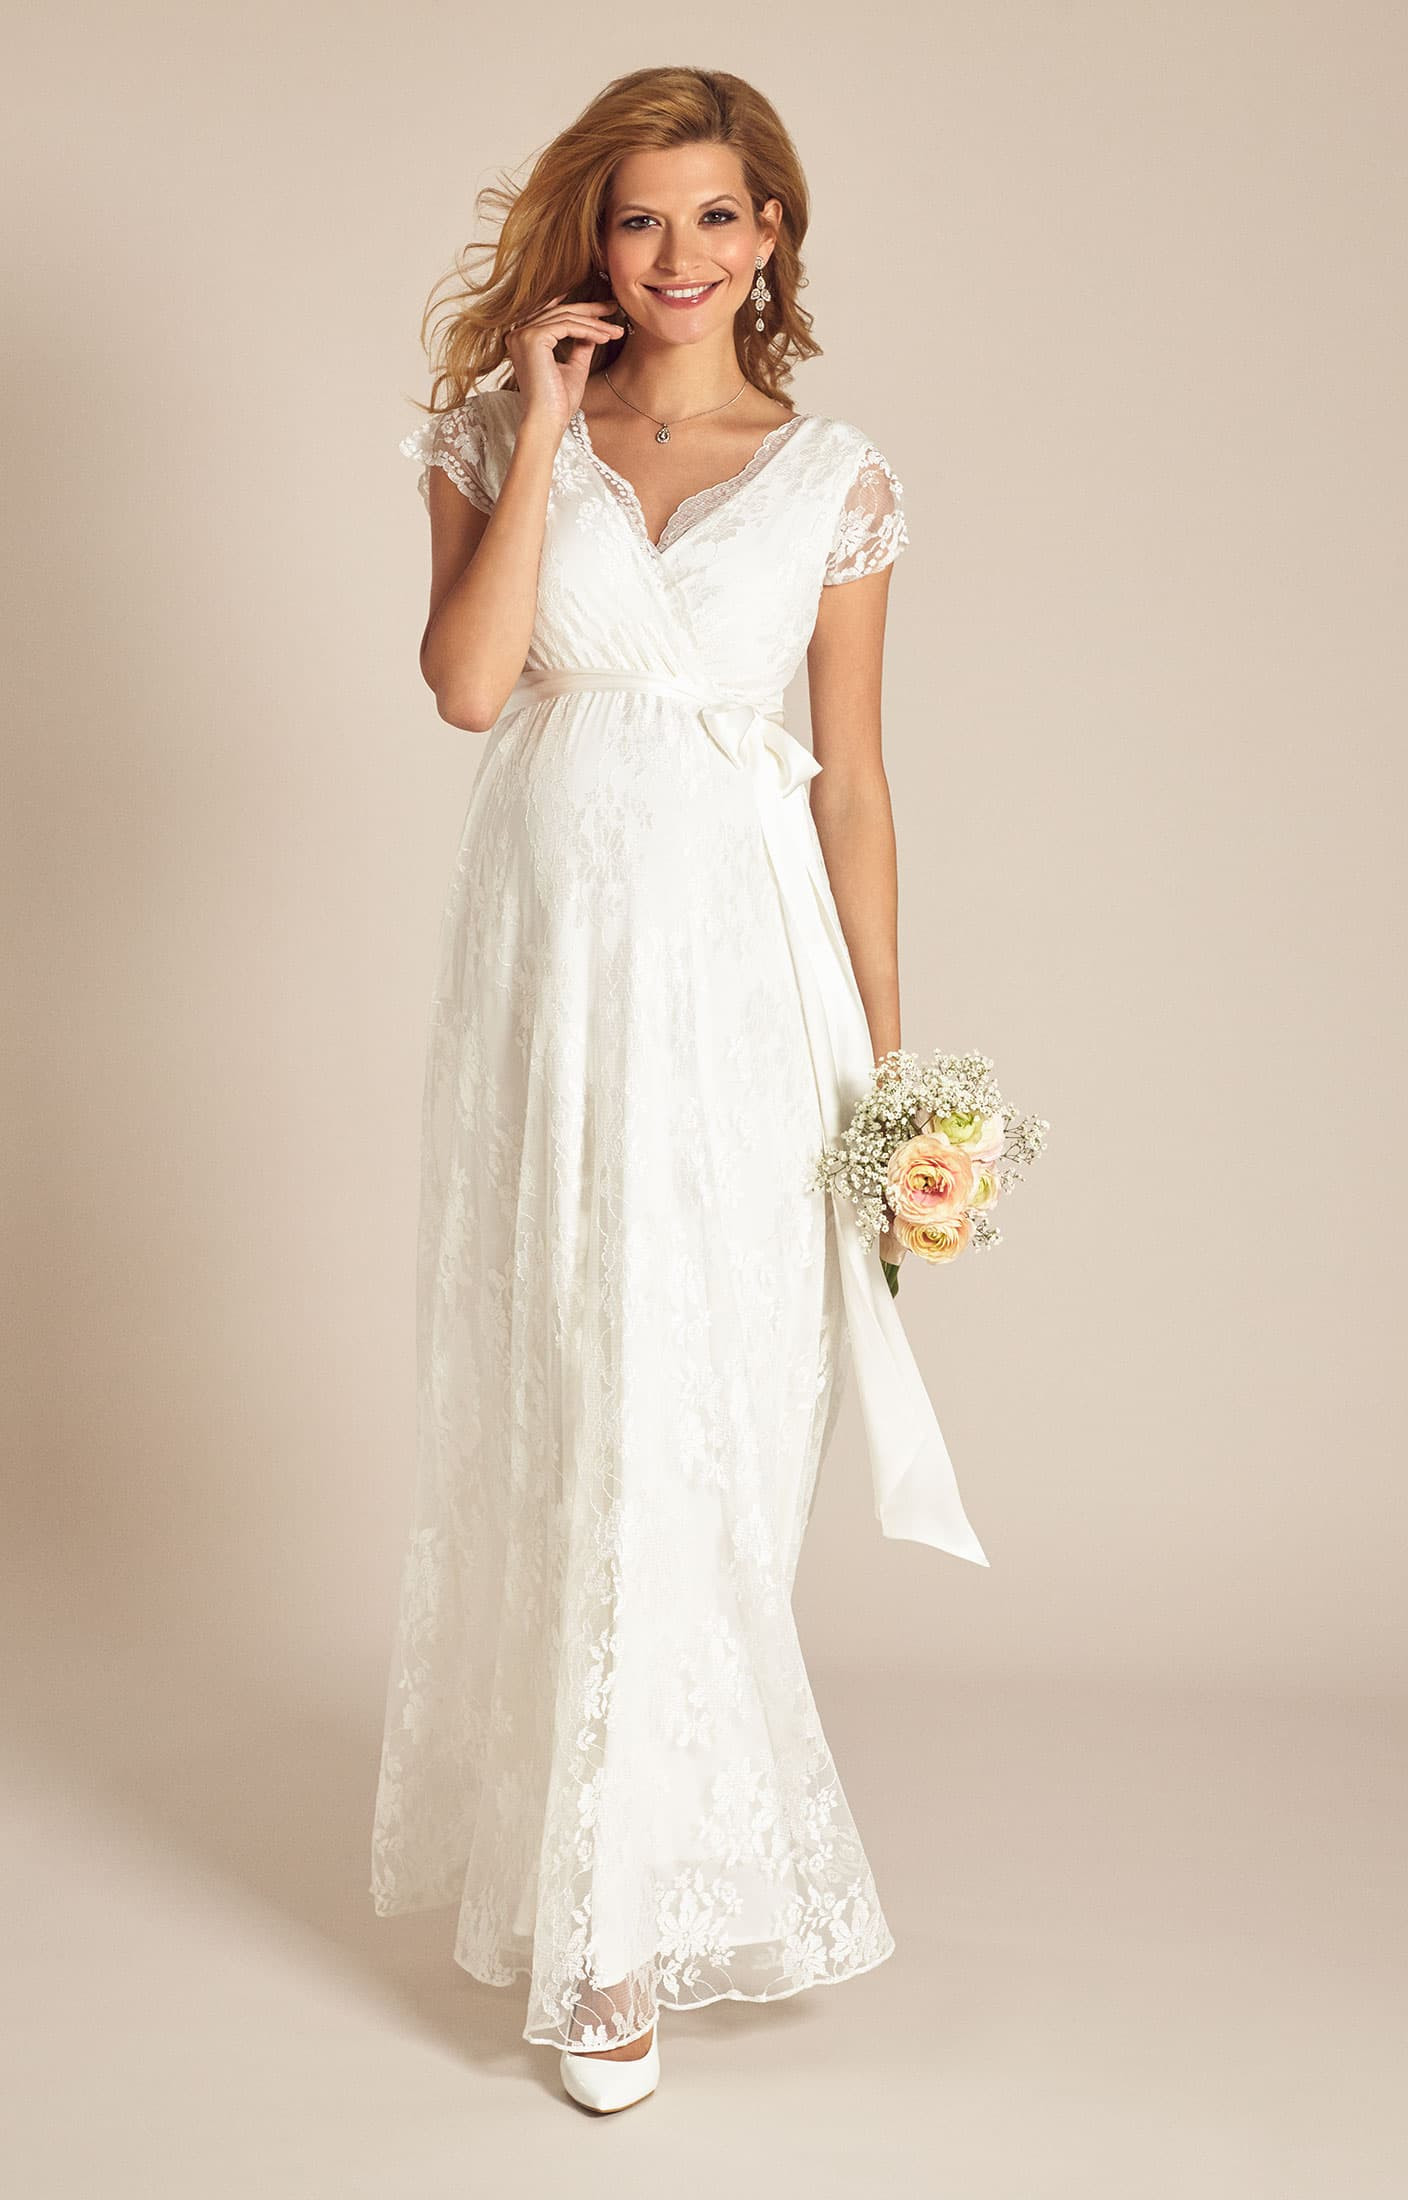 Jcpenney Wedding Gowns
 Jcpenney wedding dresses wedding dresses